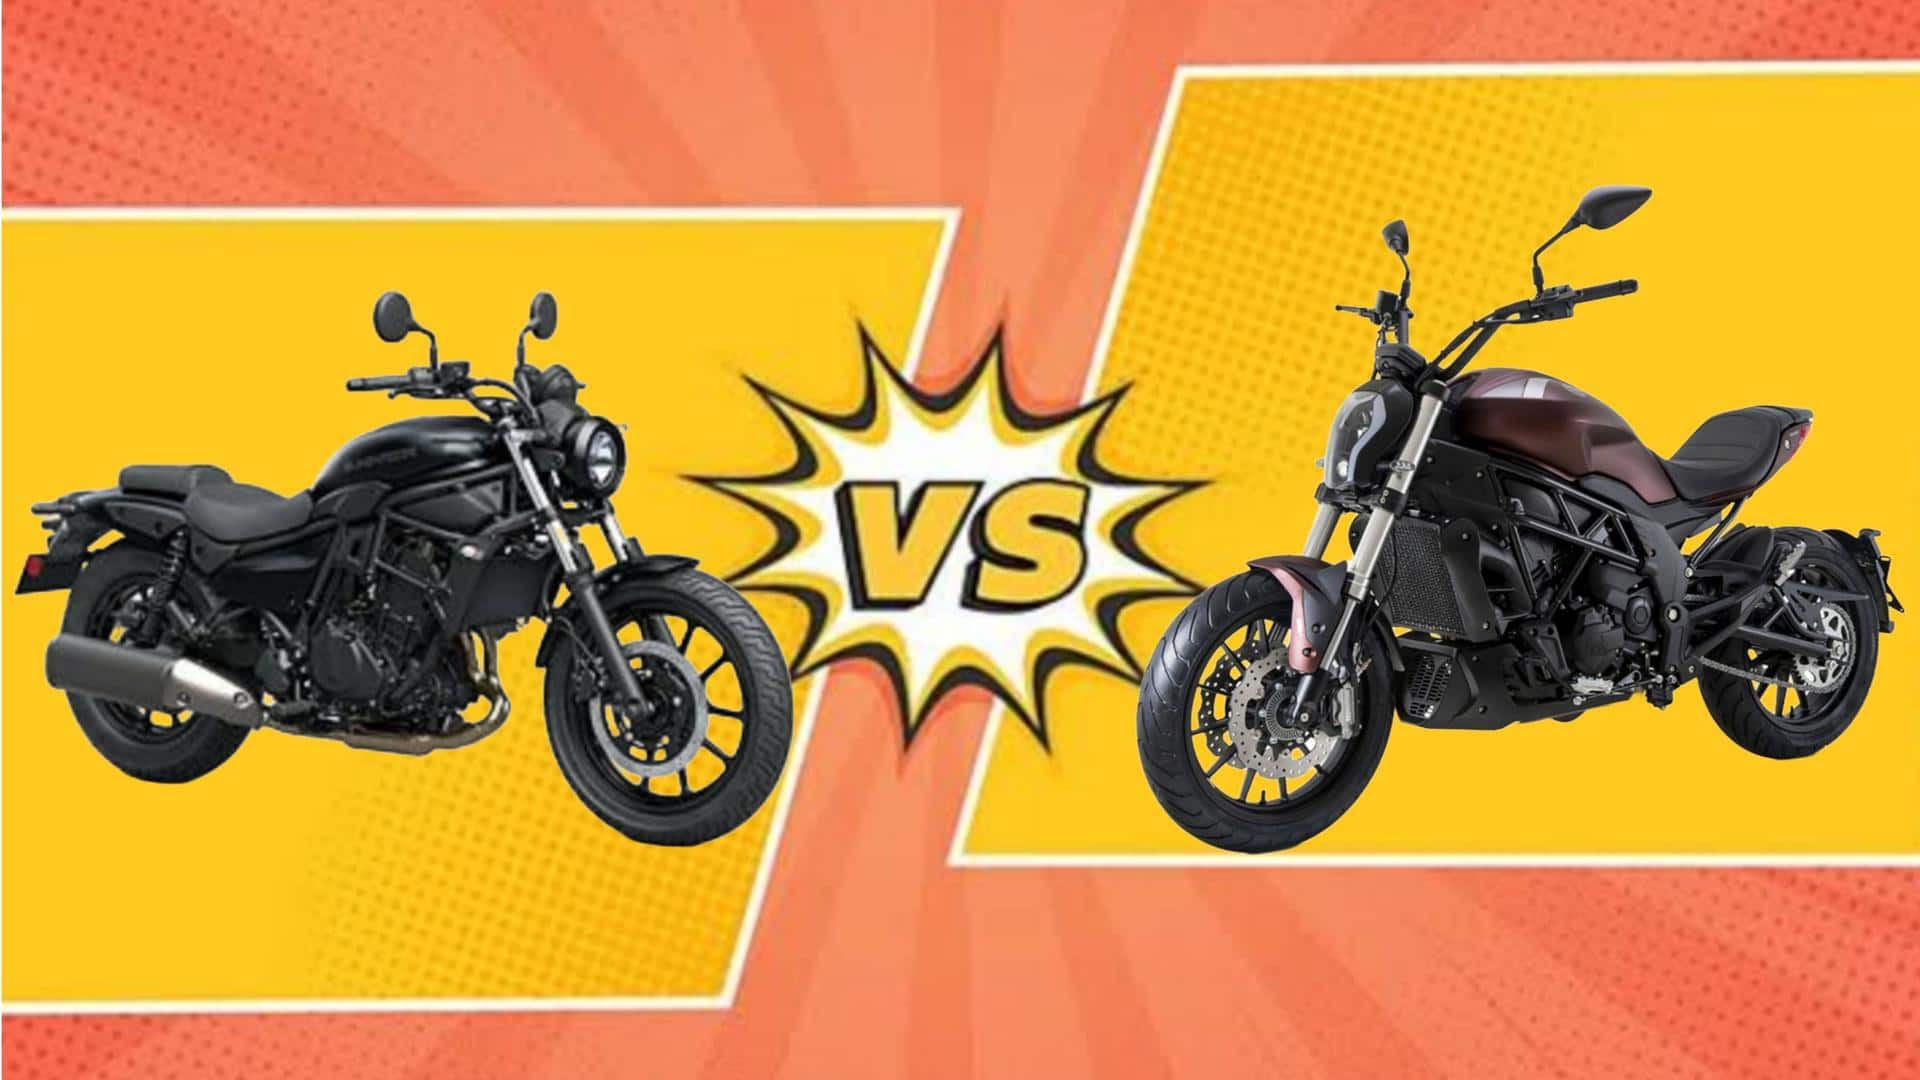 2023 Kawasaki Eliminator v/s Benelli 502C: Which one is better